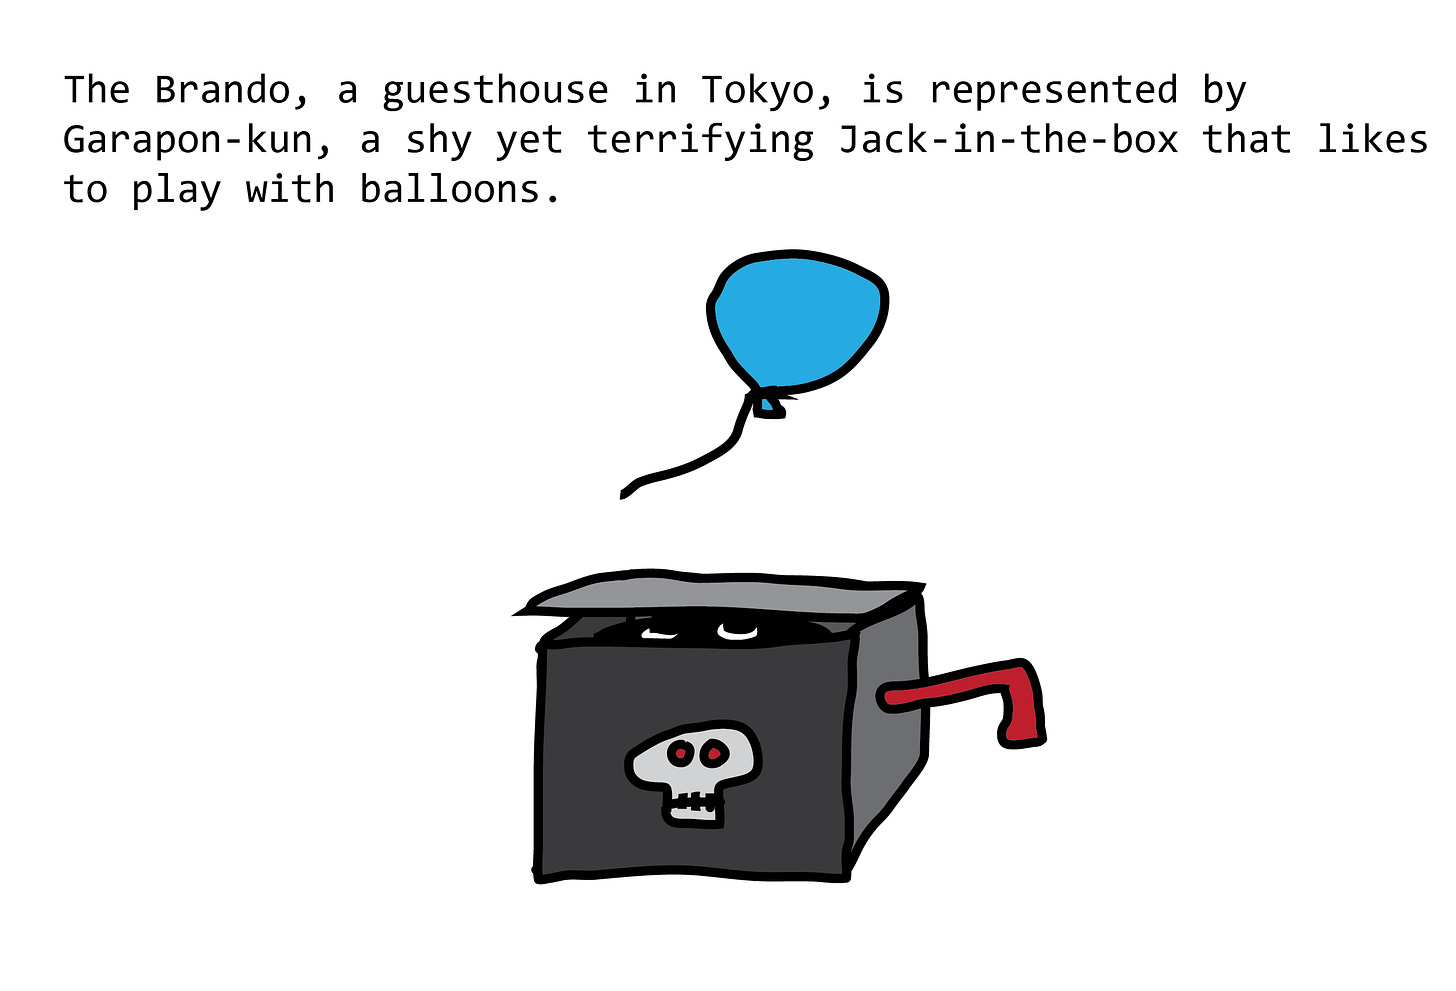 The Brando, a guesthouse in Tokyo, is represented by Garapon-kun, a shy yet terrifying Jack-in-the-box that likes to play with balloons. Jack-in-the-box has a tiny skull on the front, and a shadowy figure inside is looking up at a balloon that floats overhead